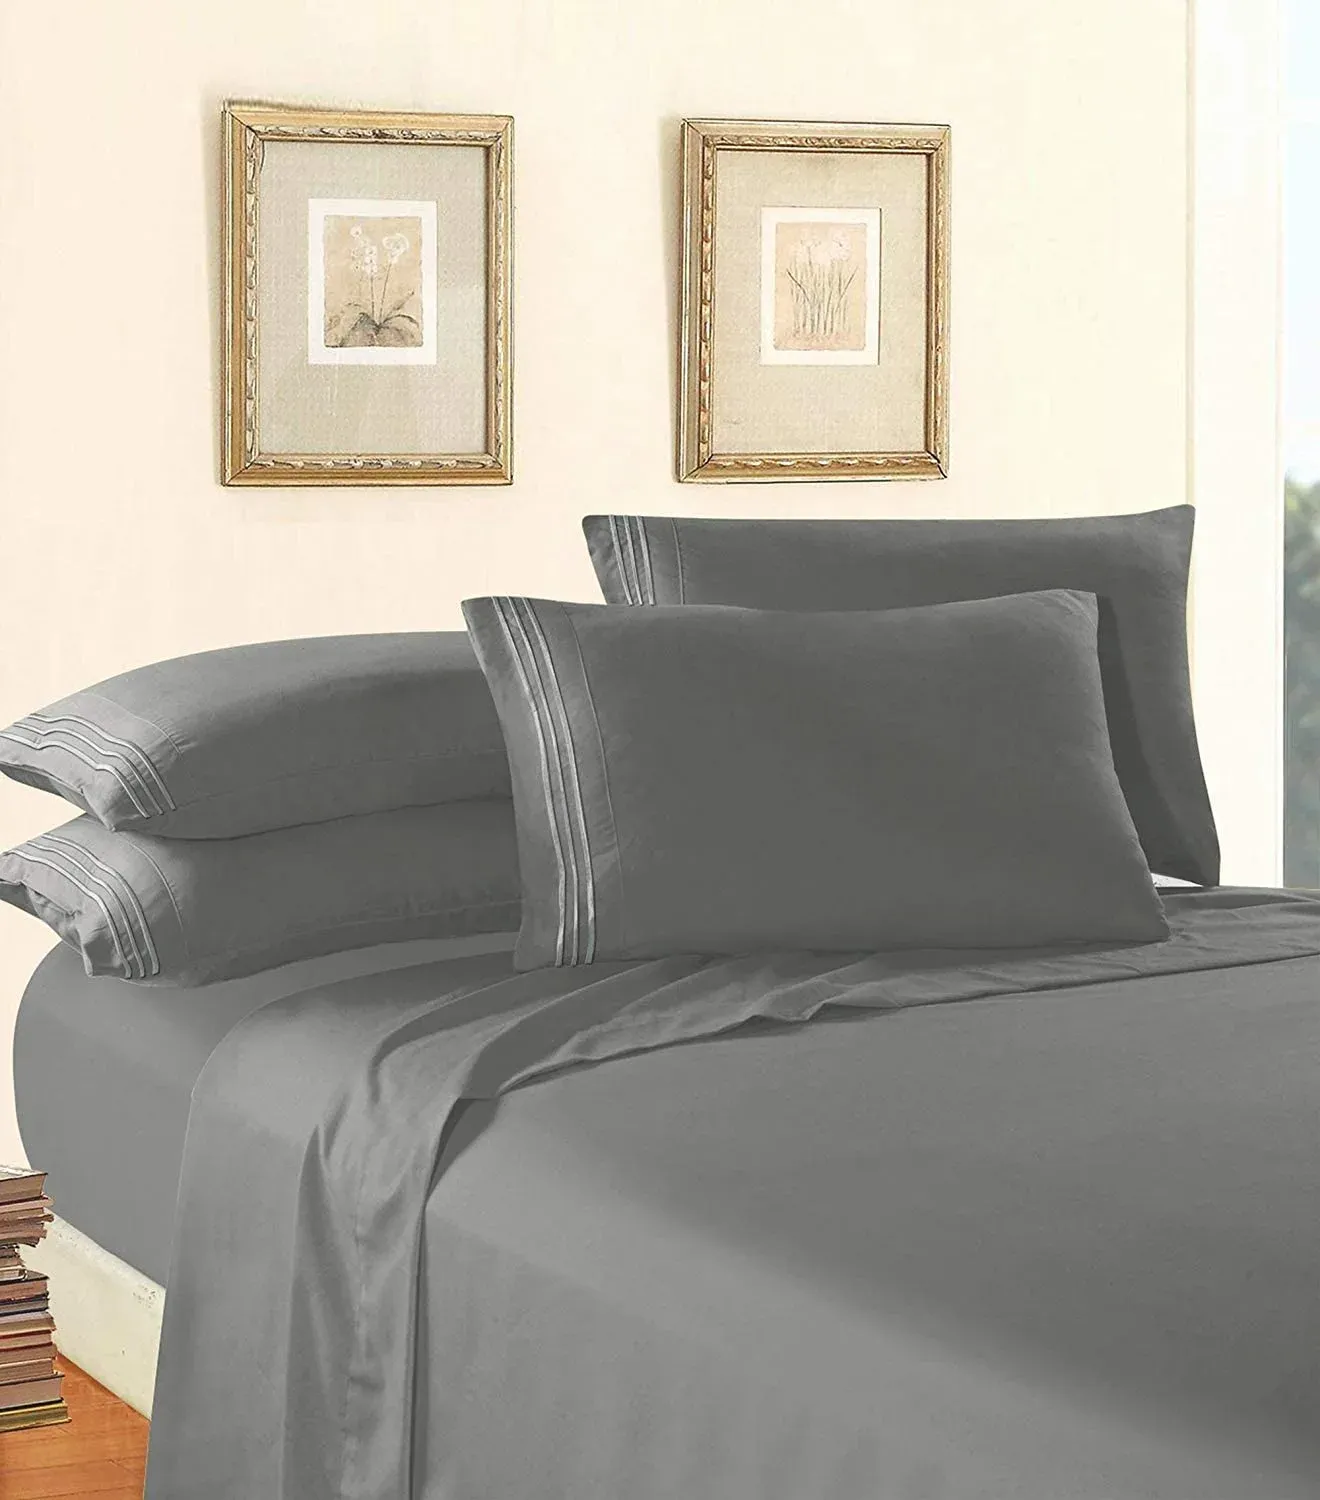 Luxury Soft 1500 Thread Count Egyptian 4 pcs Premium Quality Wrinkle Resistant Coziest Bedding Set Deep Pockets Queen